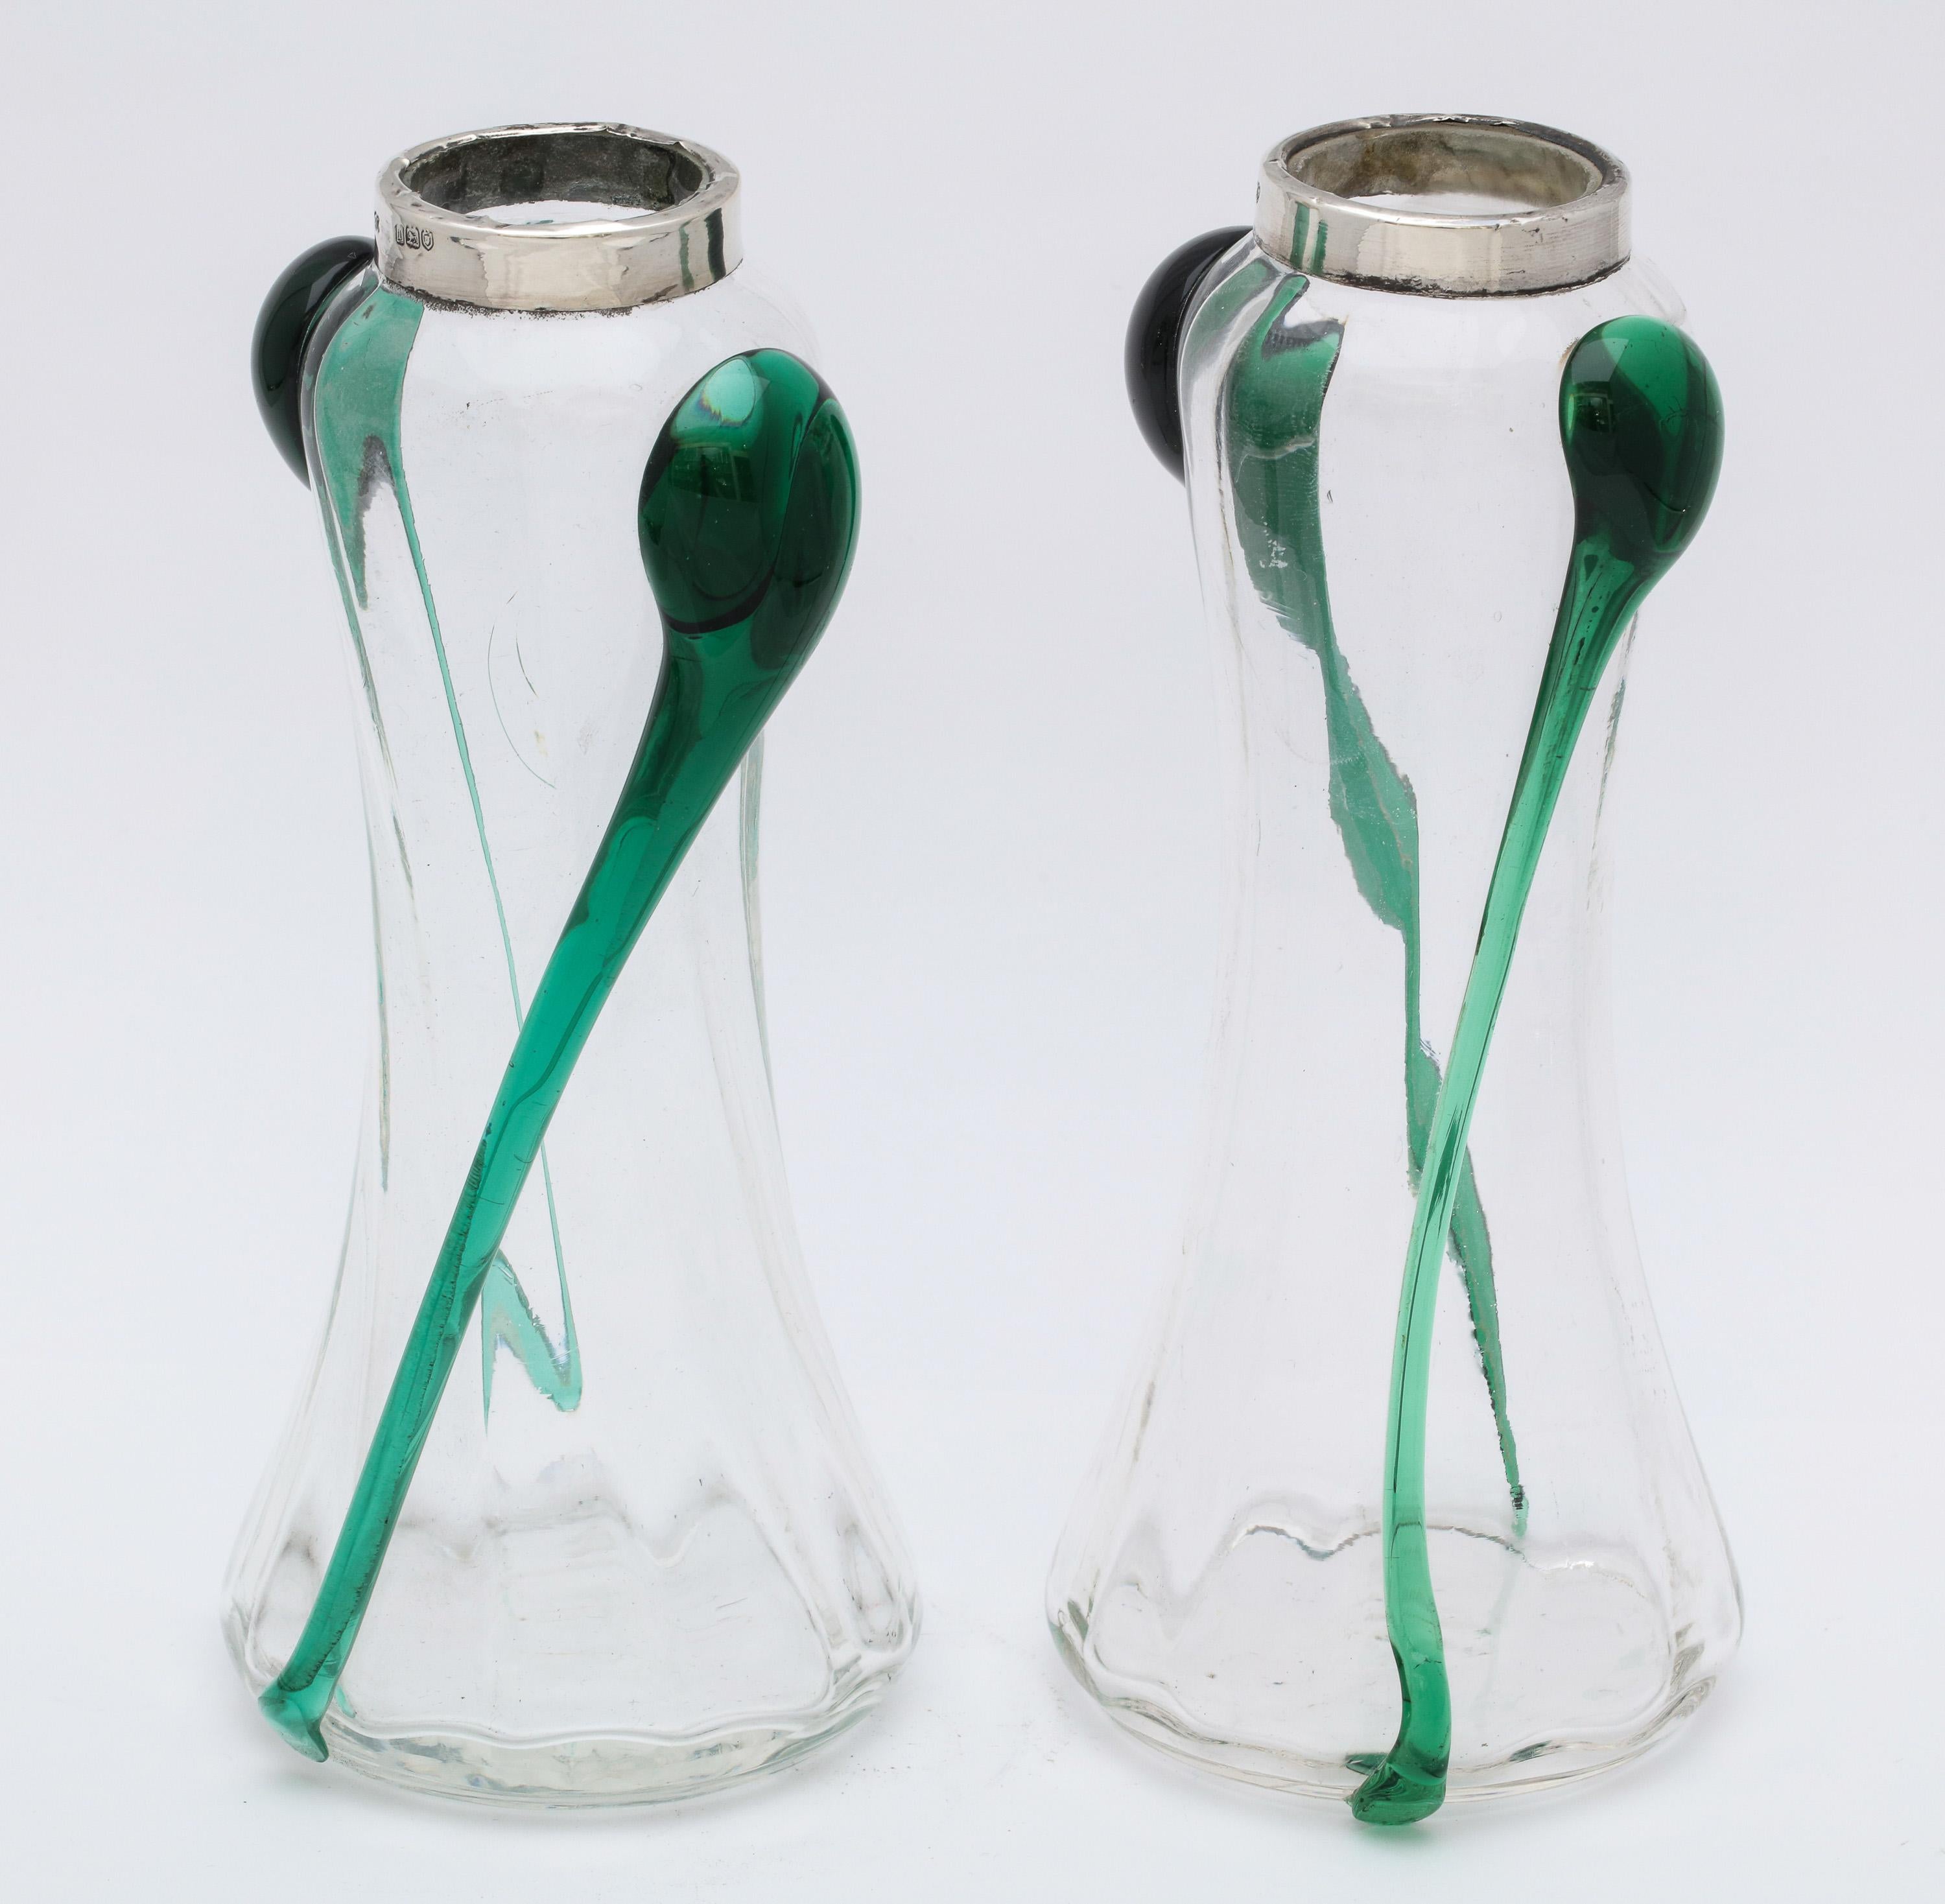 English Art Nouveau Sterling Silver-Mounted Blown Green and Clear Glass Bud Vases, Pair